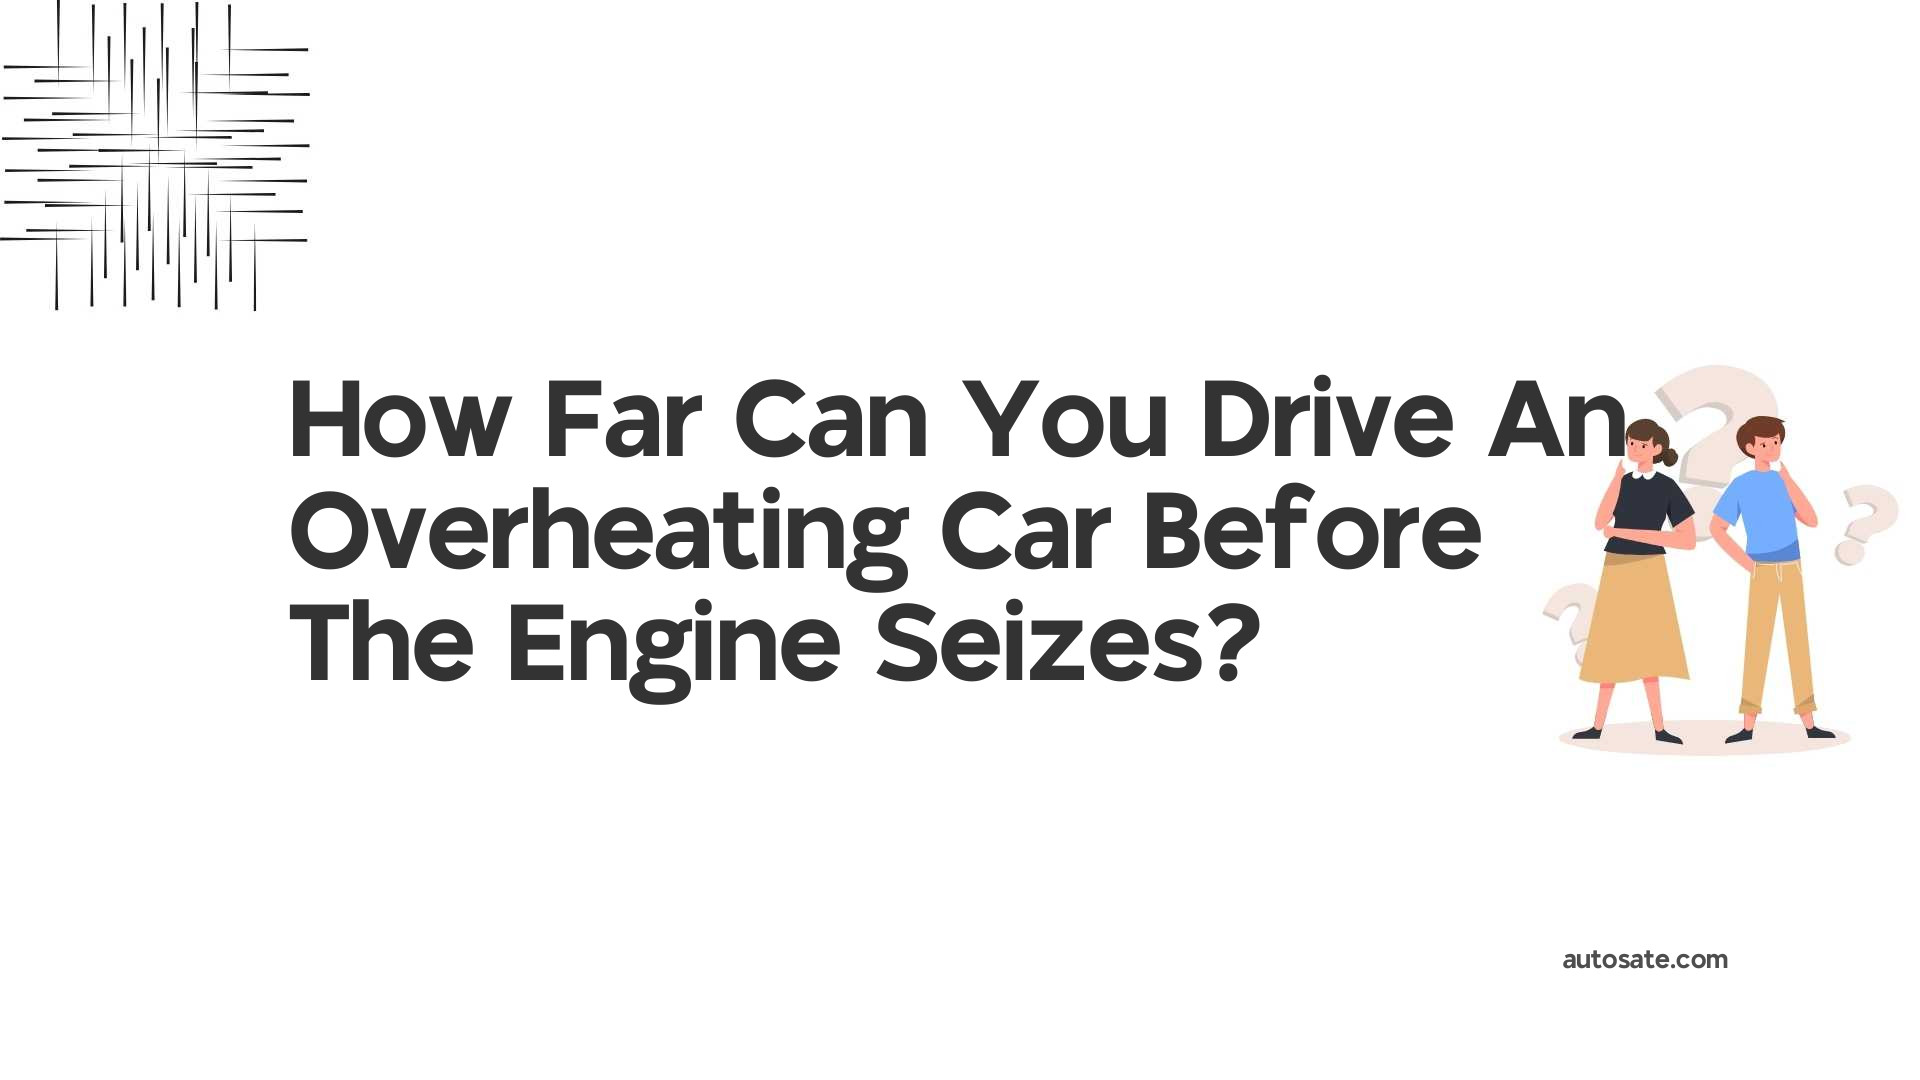 How Far Can You Drive An Overheating Car Before The Engine Seizes?